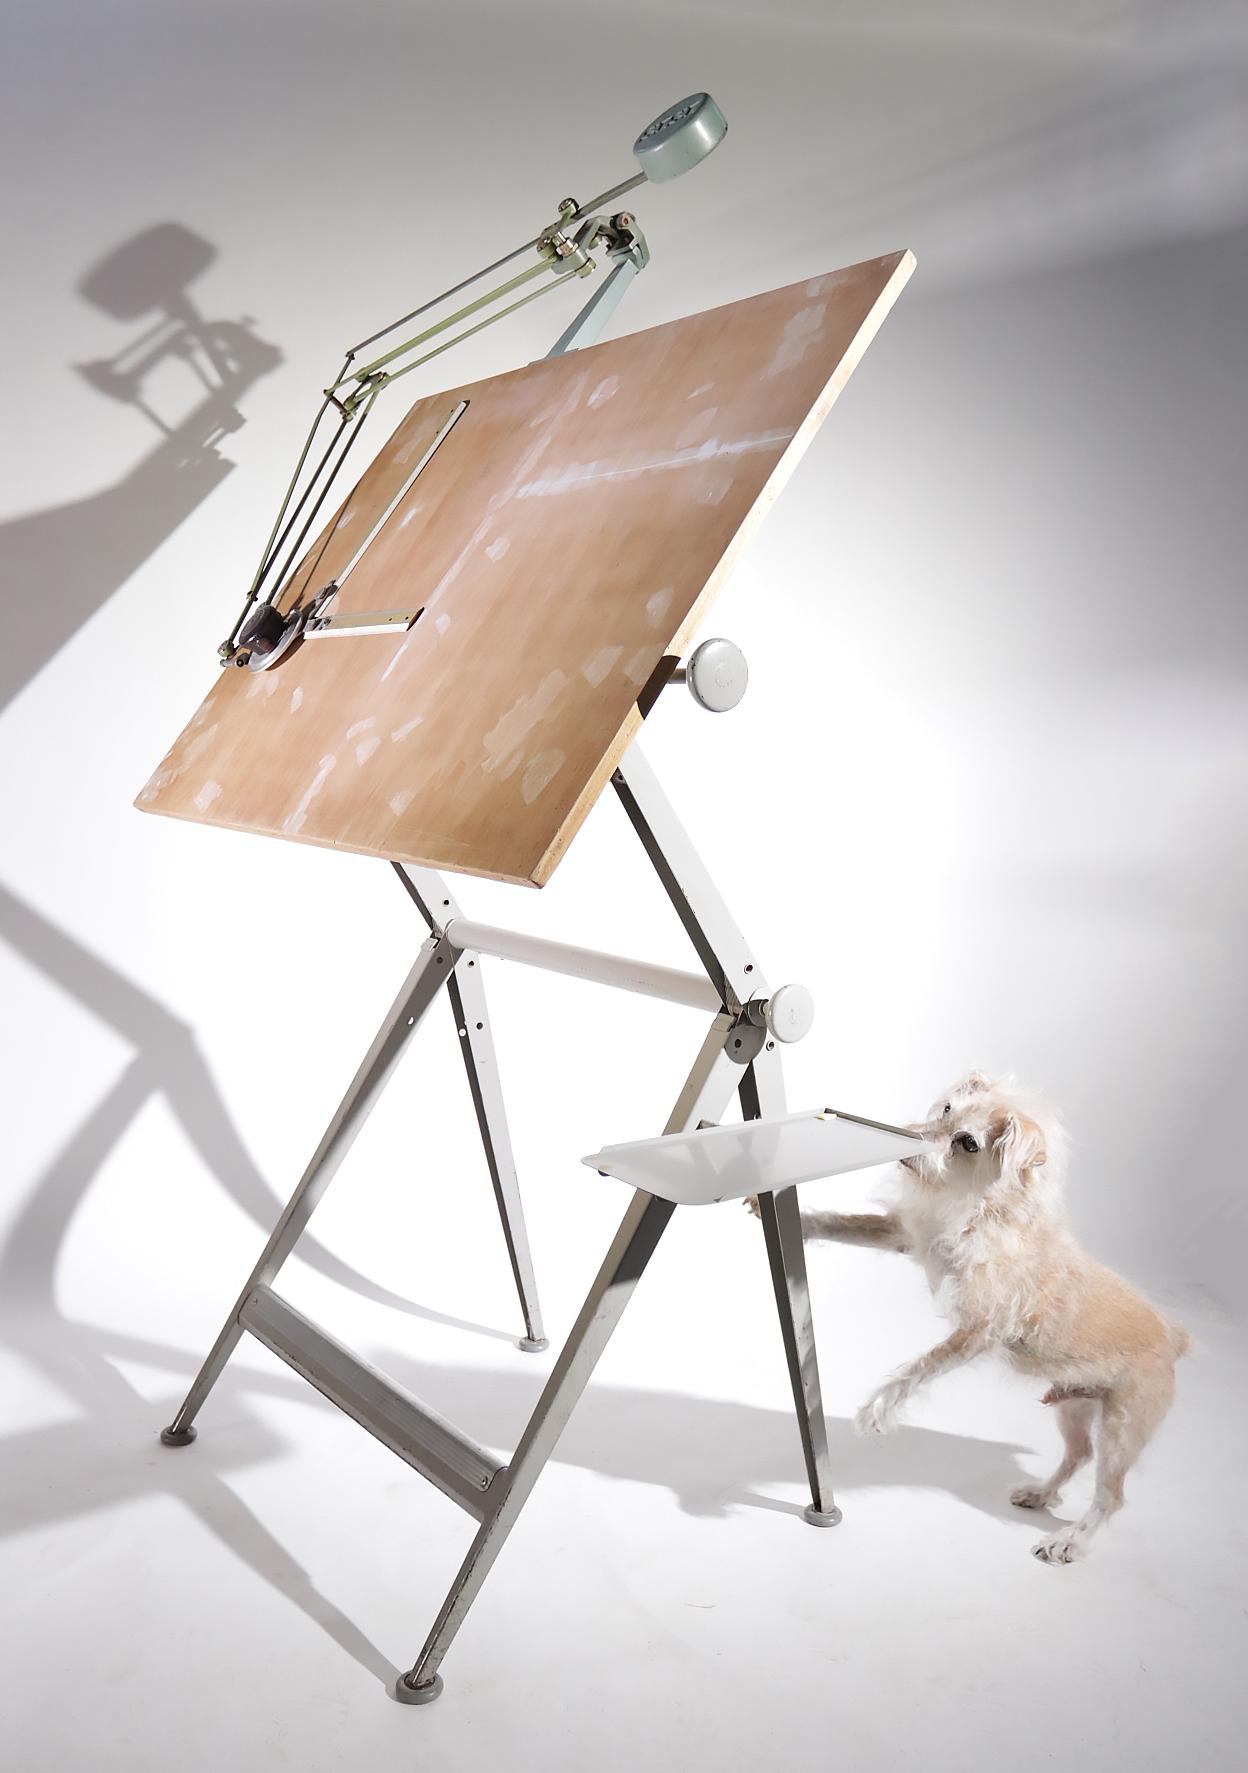 Complete Reply Dutch Design Architect drawing / drafting table designed by Wim Rietveld and Friso Kramer for Ahrend de Circel in 1959.
Design Classic, awarded with the 